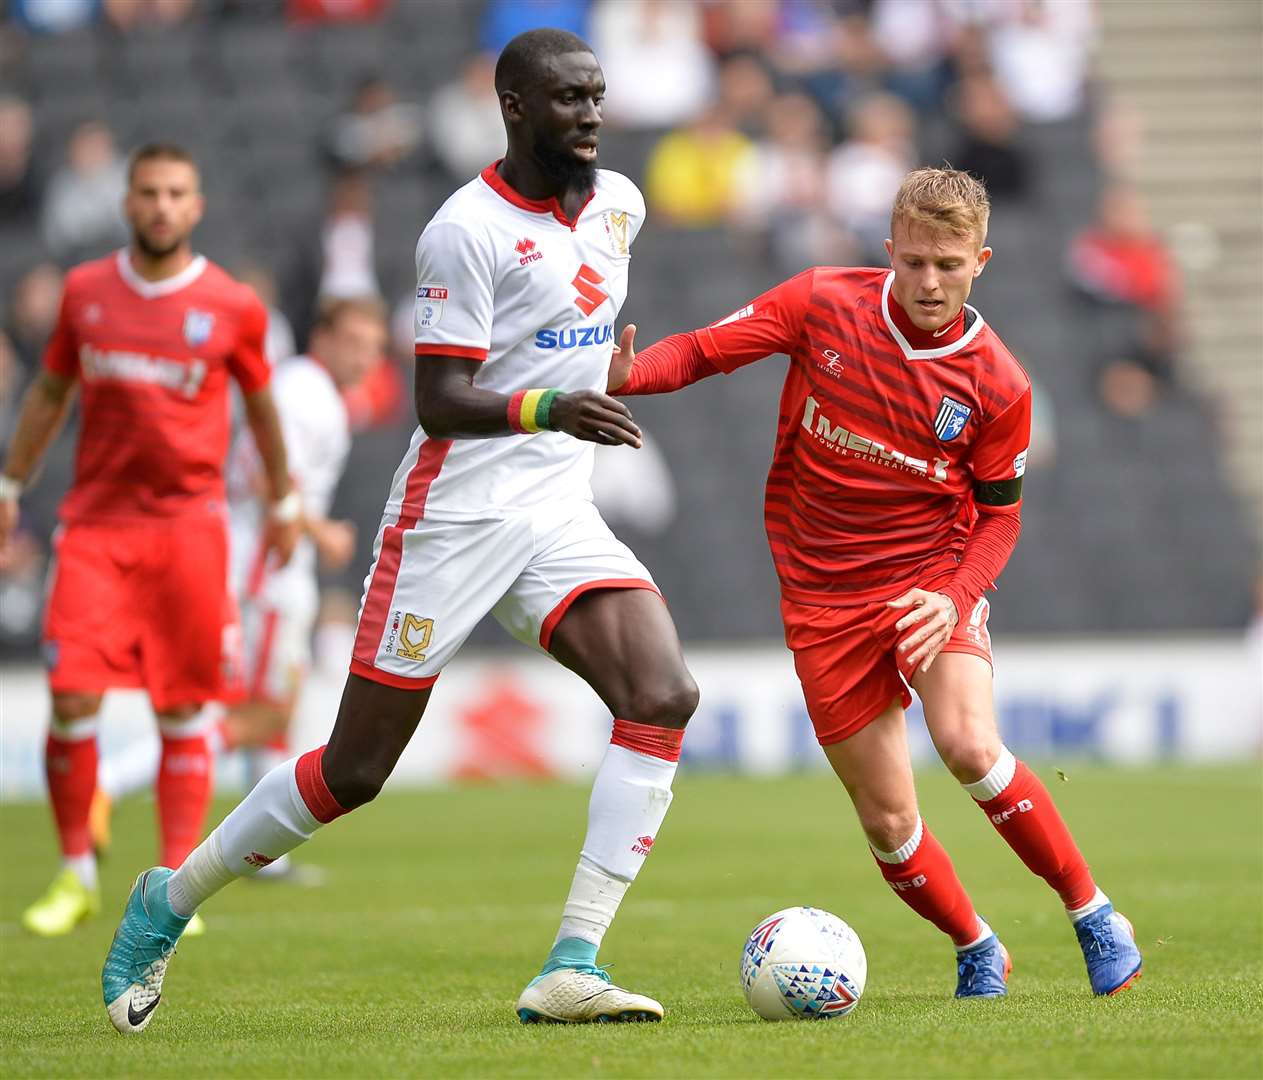 Ousseynou Cisse in action for MK Dons against the Gills at Stadium MK Picture: Ady Kerry